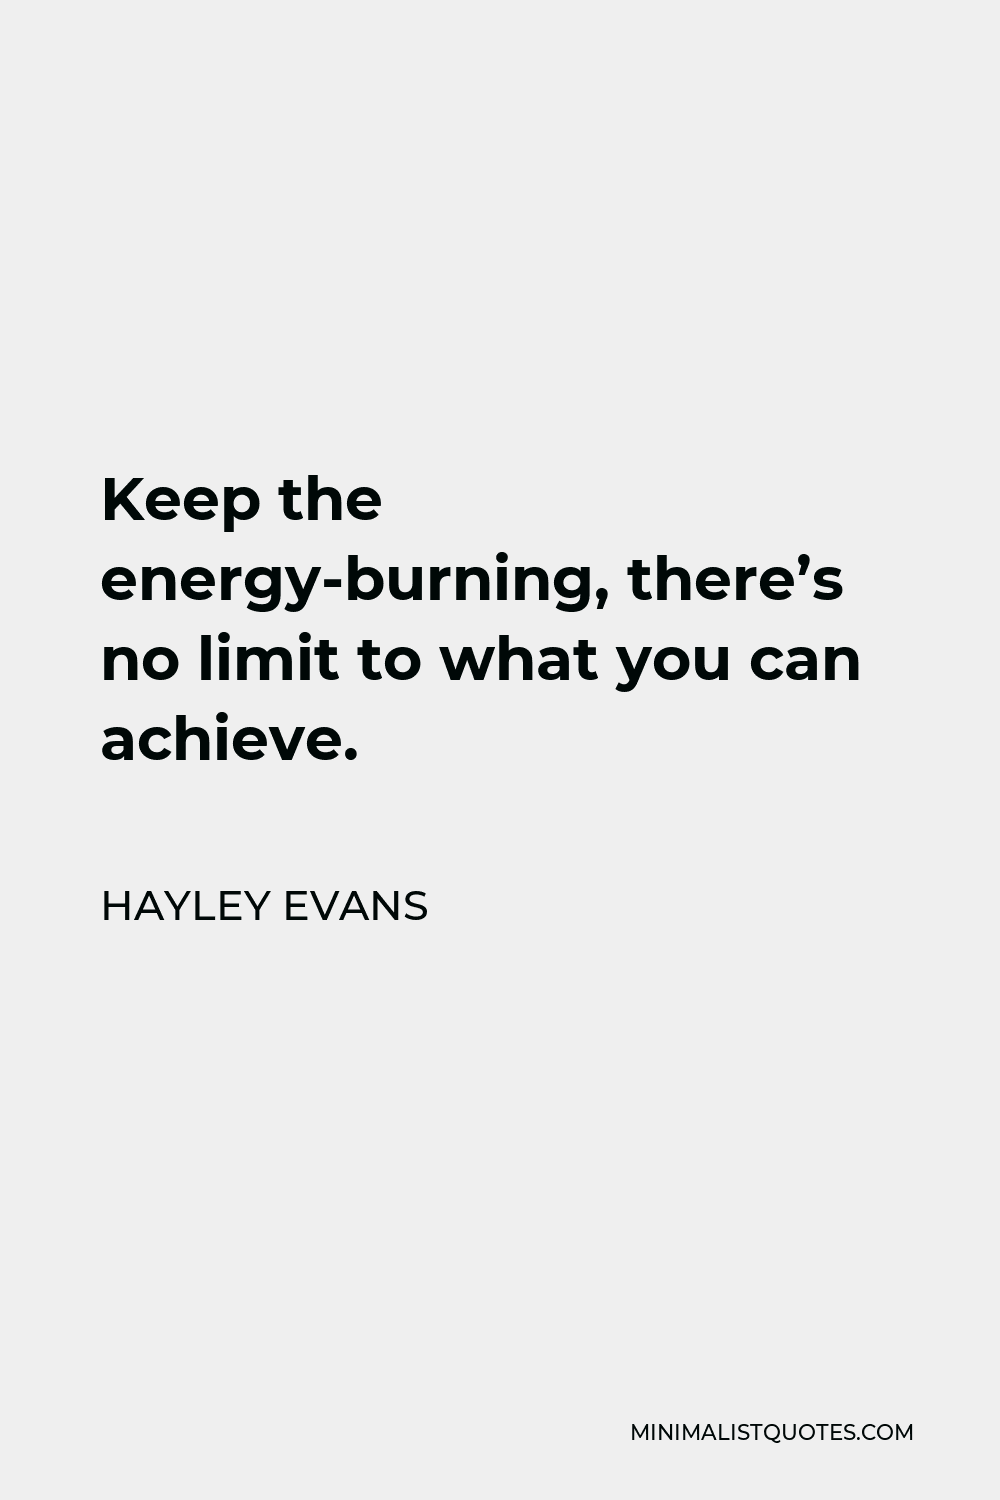 Hayley Evans Quote - Keep the energy-burning, there’s no limit to what you can achieve.